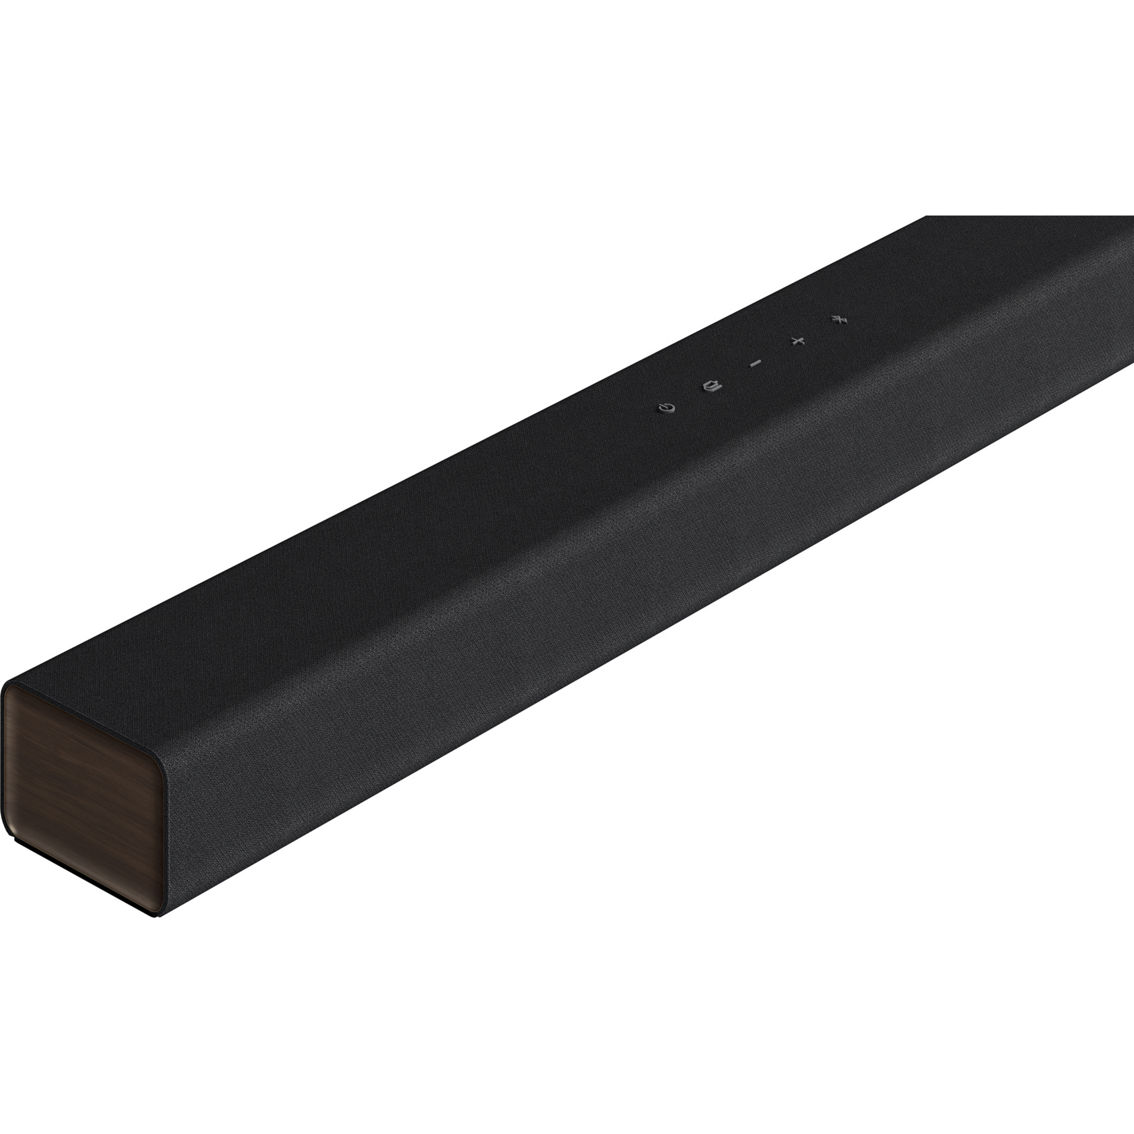 LG S40W 2.1 Channel 300W Sound Bar with Wireless Subwoofer - Image 6 of 7